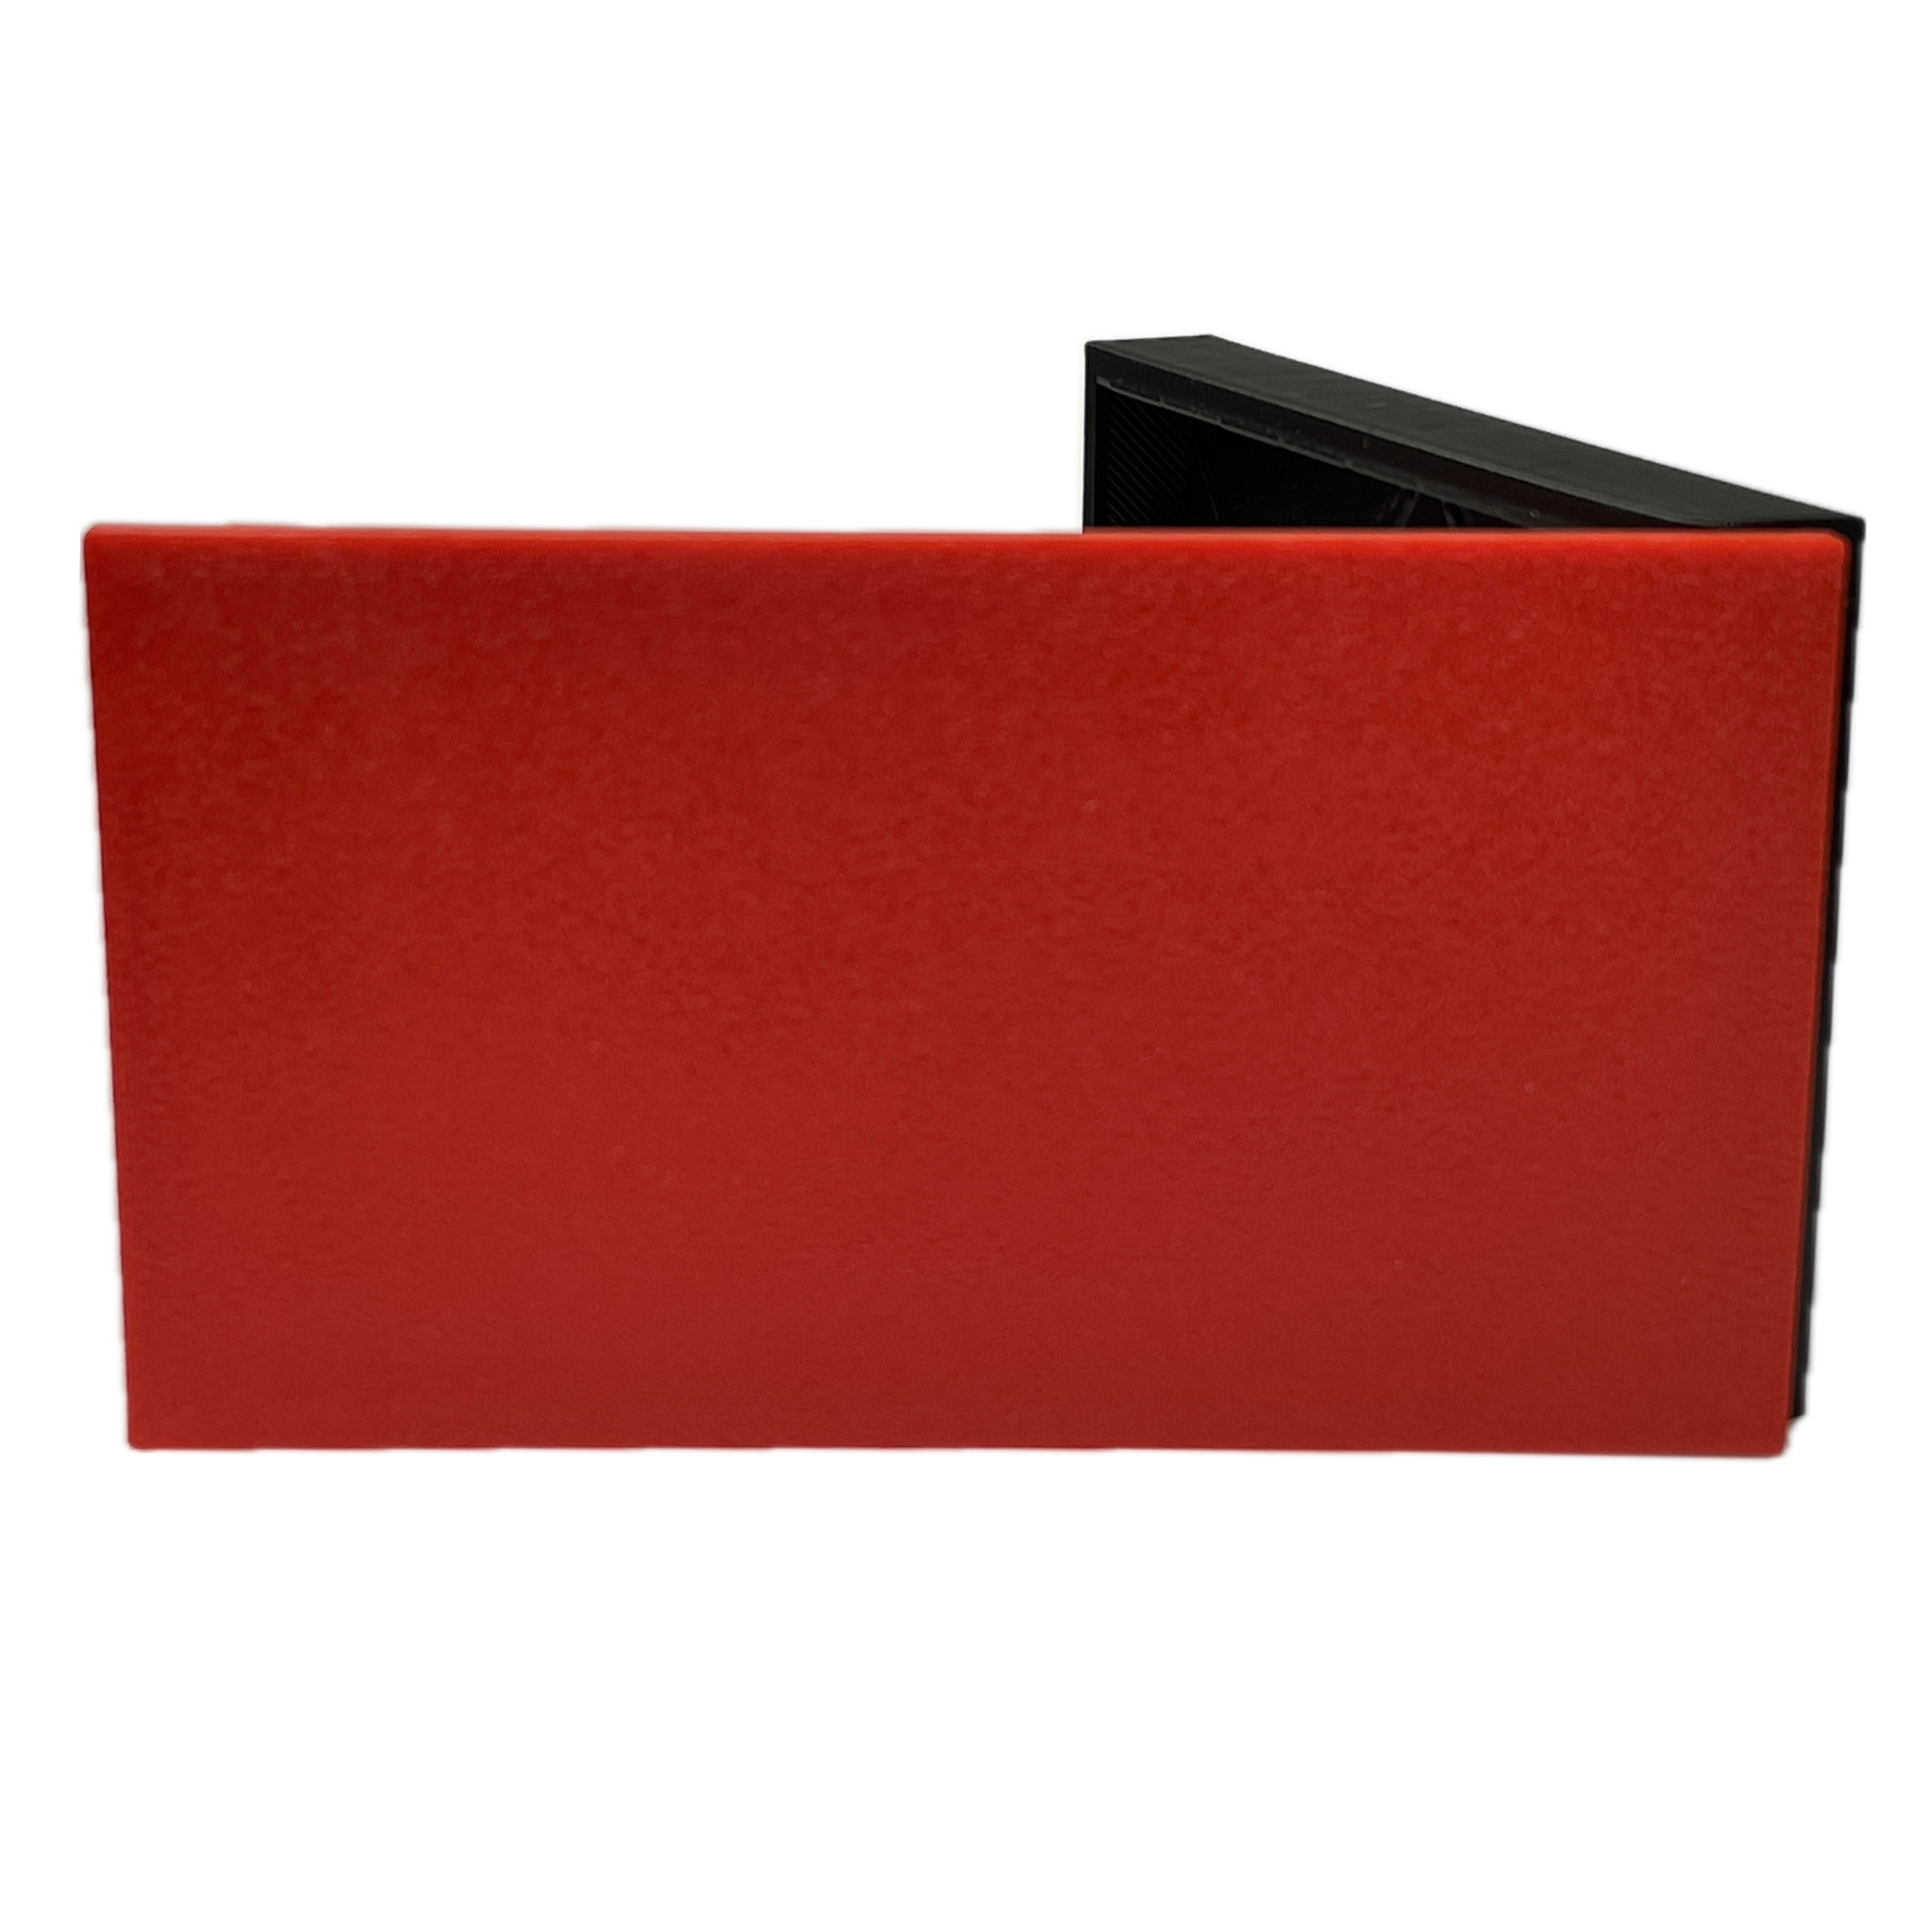 Solid red mailbox flag for brick or stone mailboxes product picture on a white background.